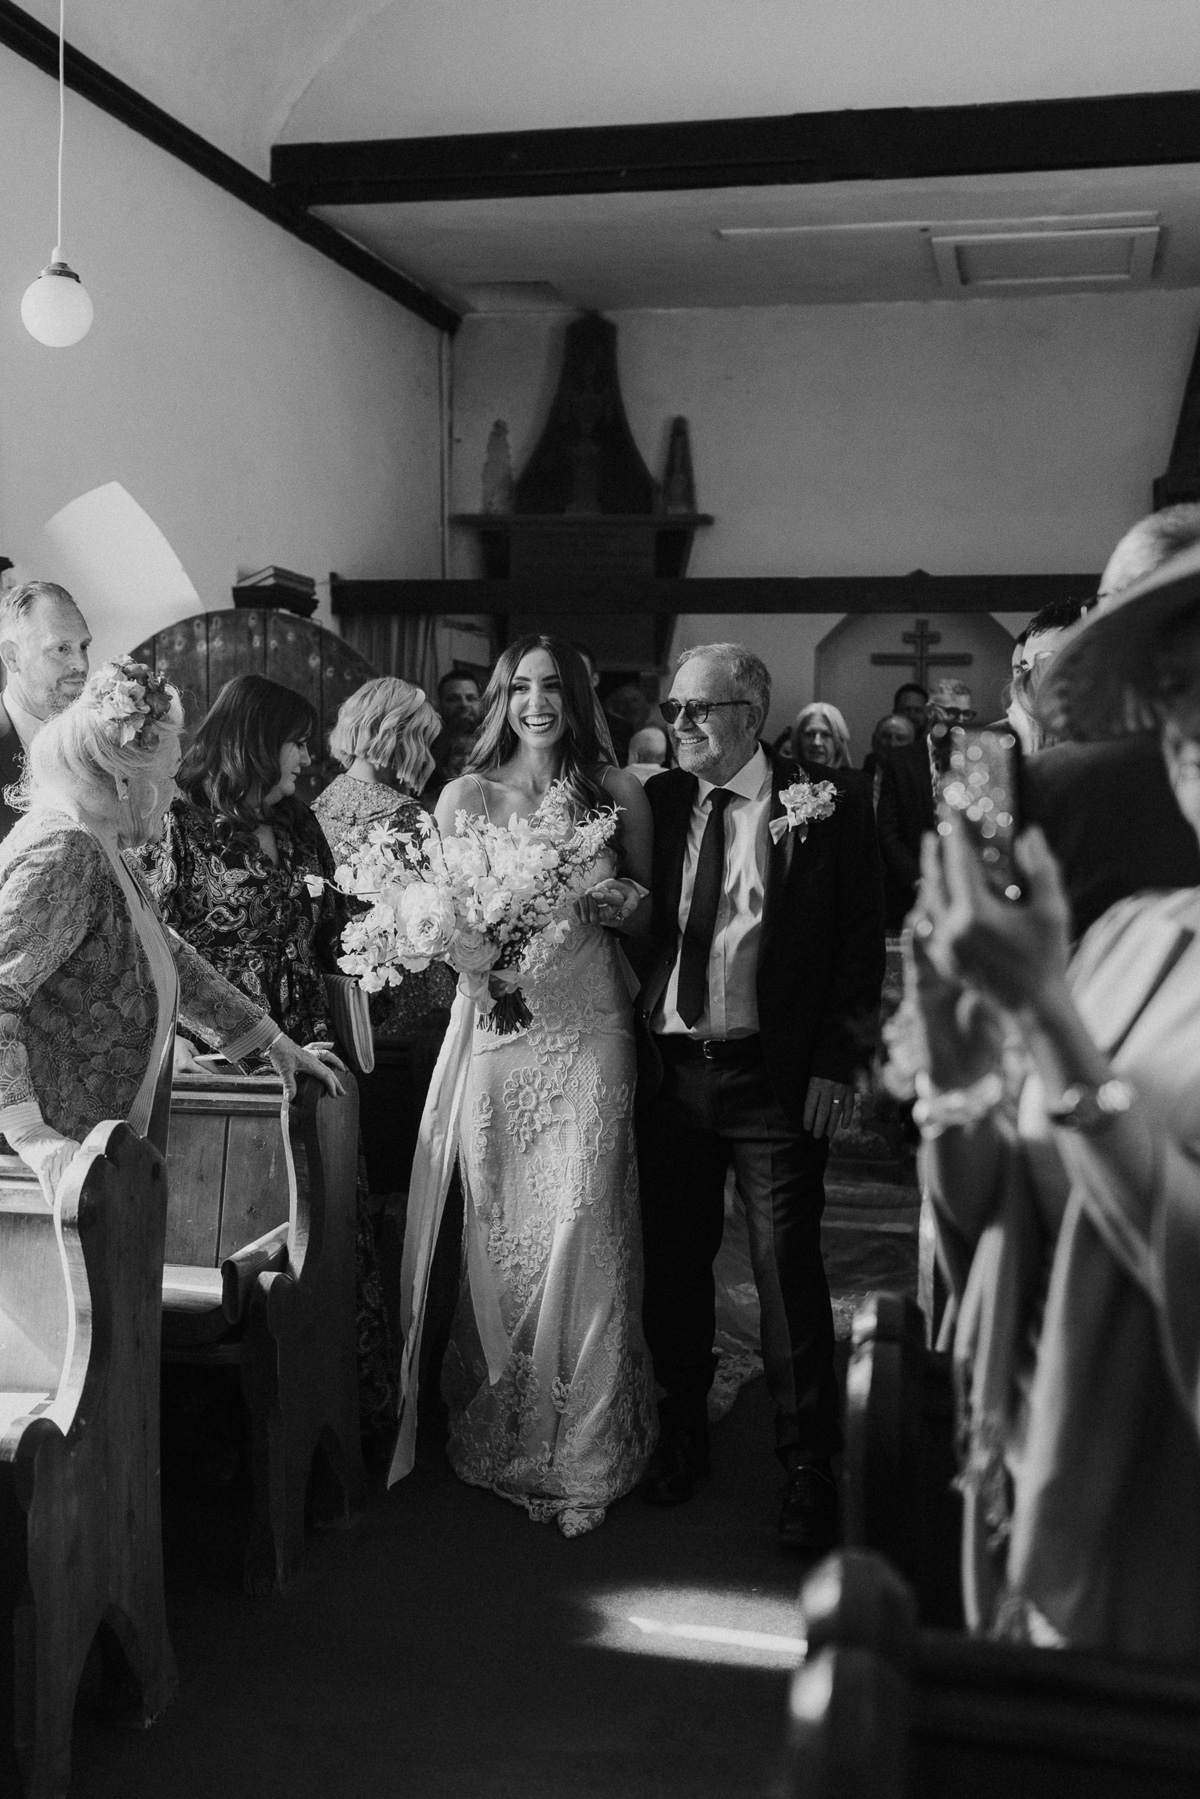 Church wedding ceremony at The magical dance floor at Dewsall Court, country house wedding venue in Herefordshire